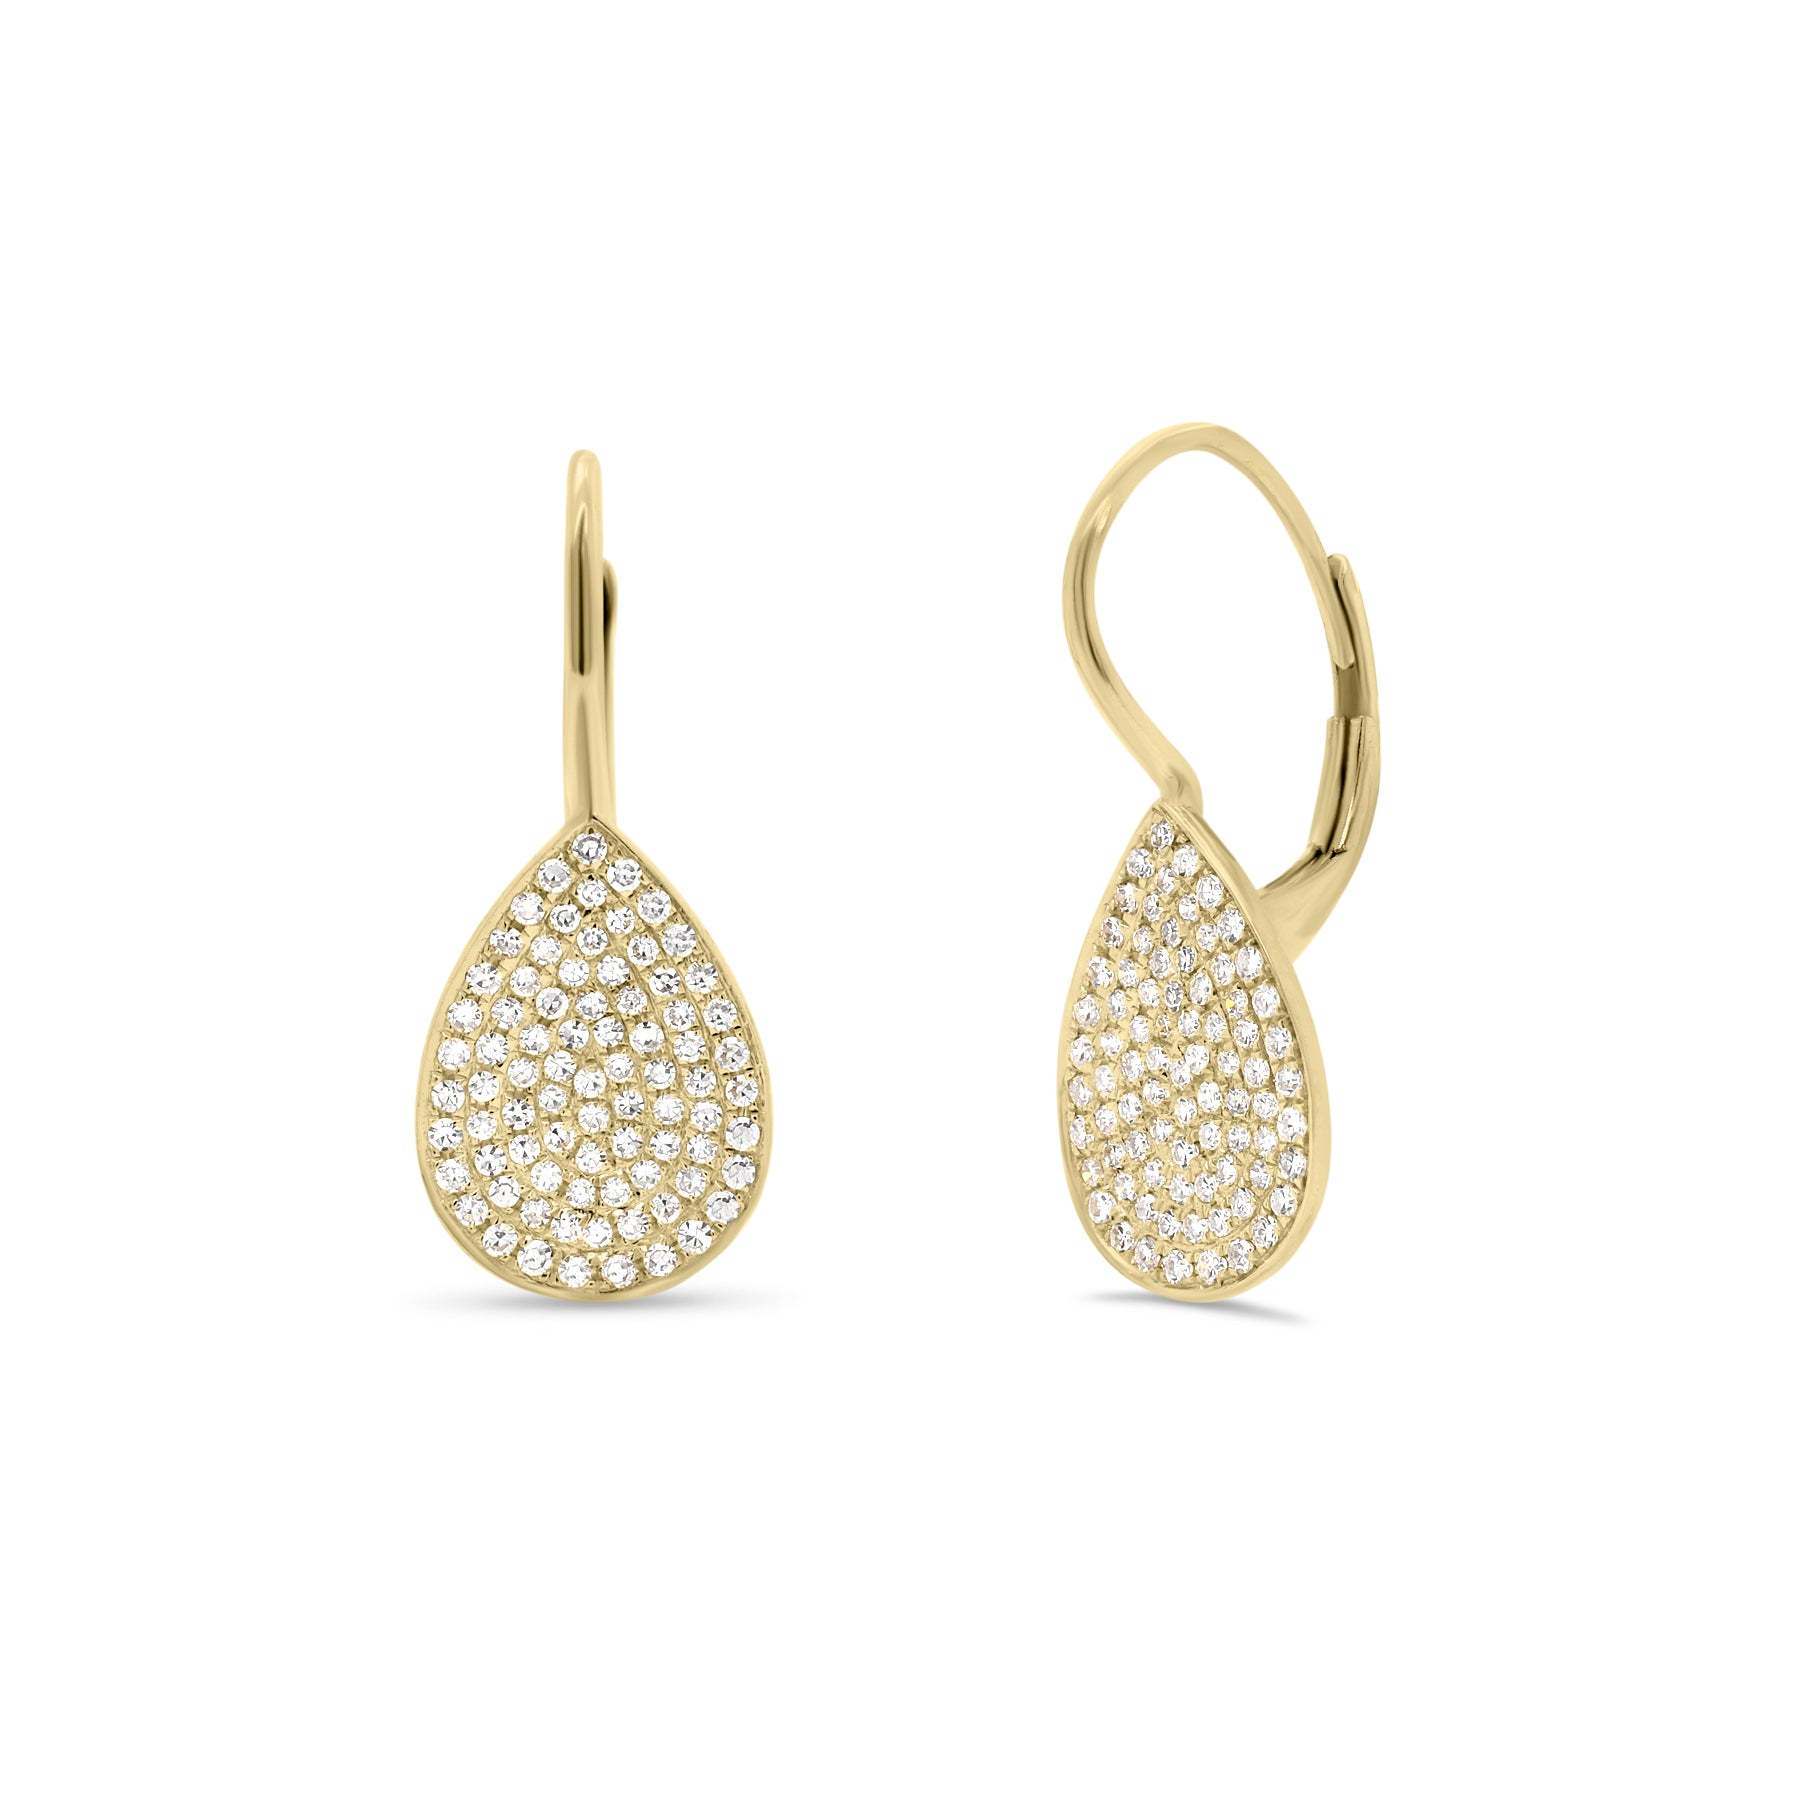 Pave Diamond Teardrop Lever-Back Earrings  - 14K gold weighing 2.09 grams  - 160 round diamonds totaling 0.42 carats